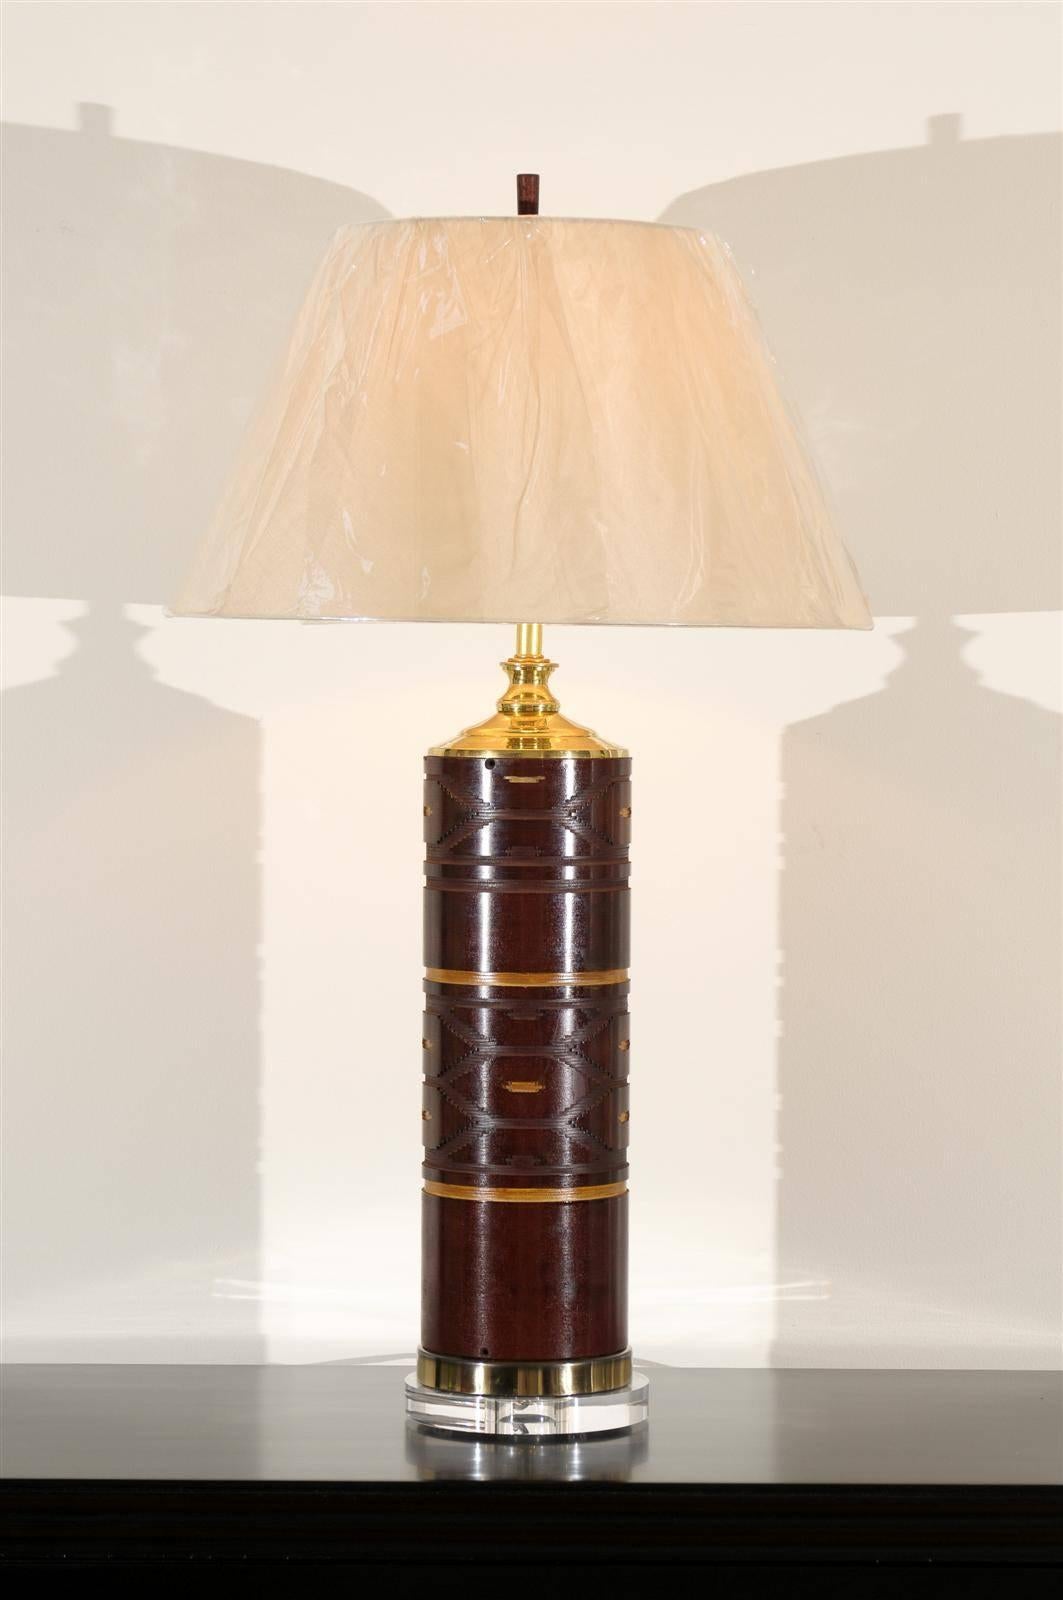 An exceptional pair of vintage wallpaper rollers as custom lamps. The pieces portray the rich look of aged leather. Fabulous detail and scale. Exquisite jewelry! Excellent restored condition. The rollers have been professionally cleaned and